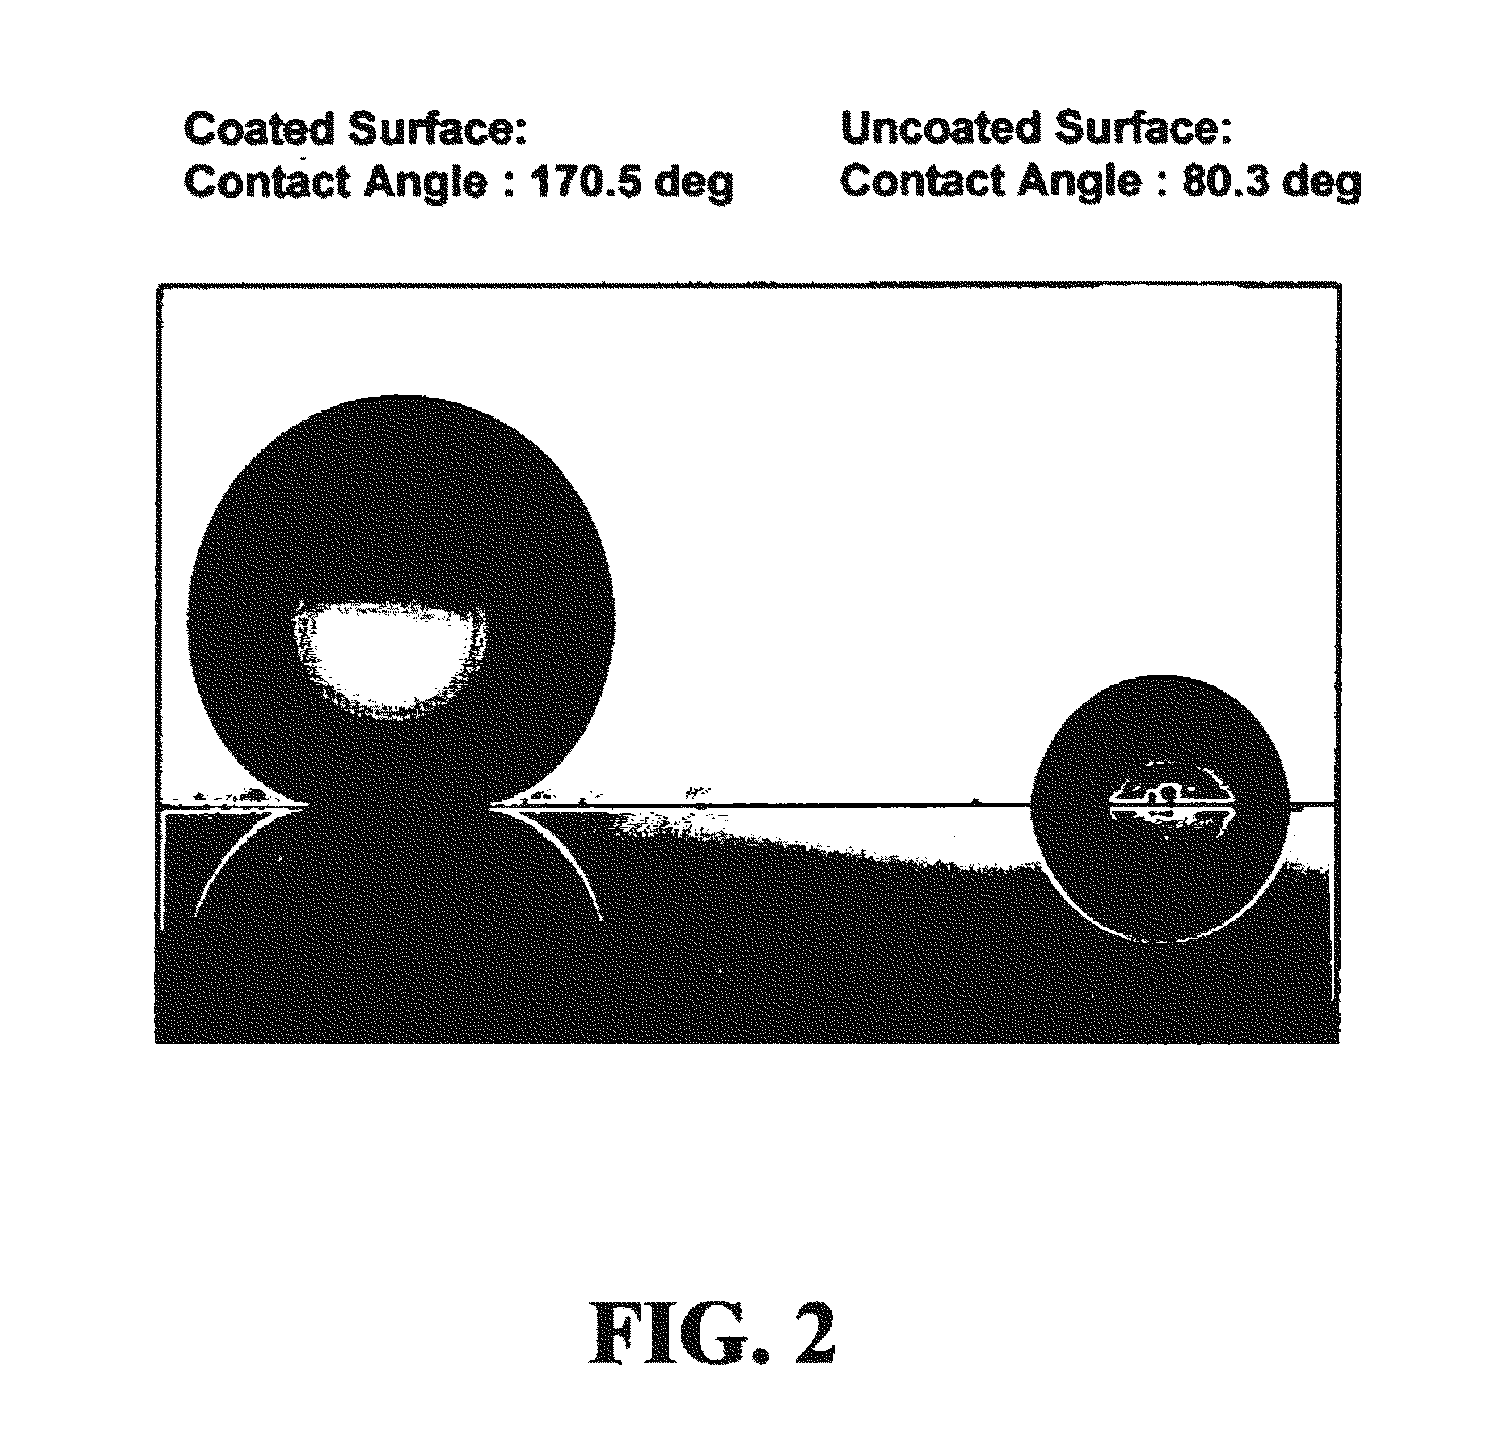 Coating compositions for producing transparent super-hydrophobic surfaces